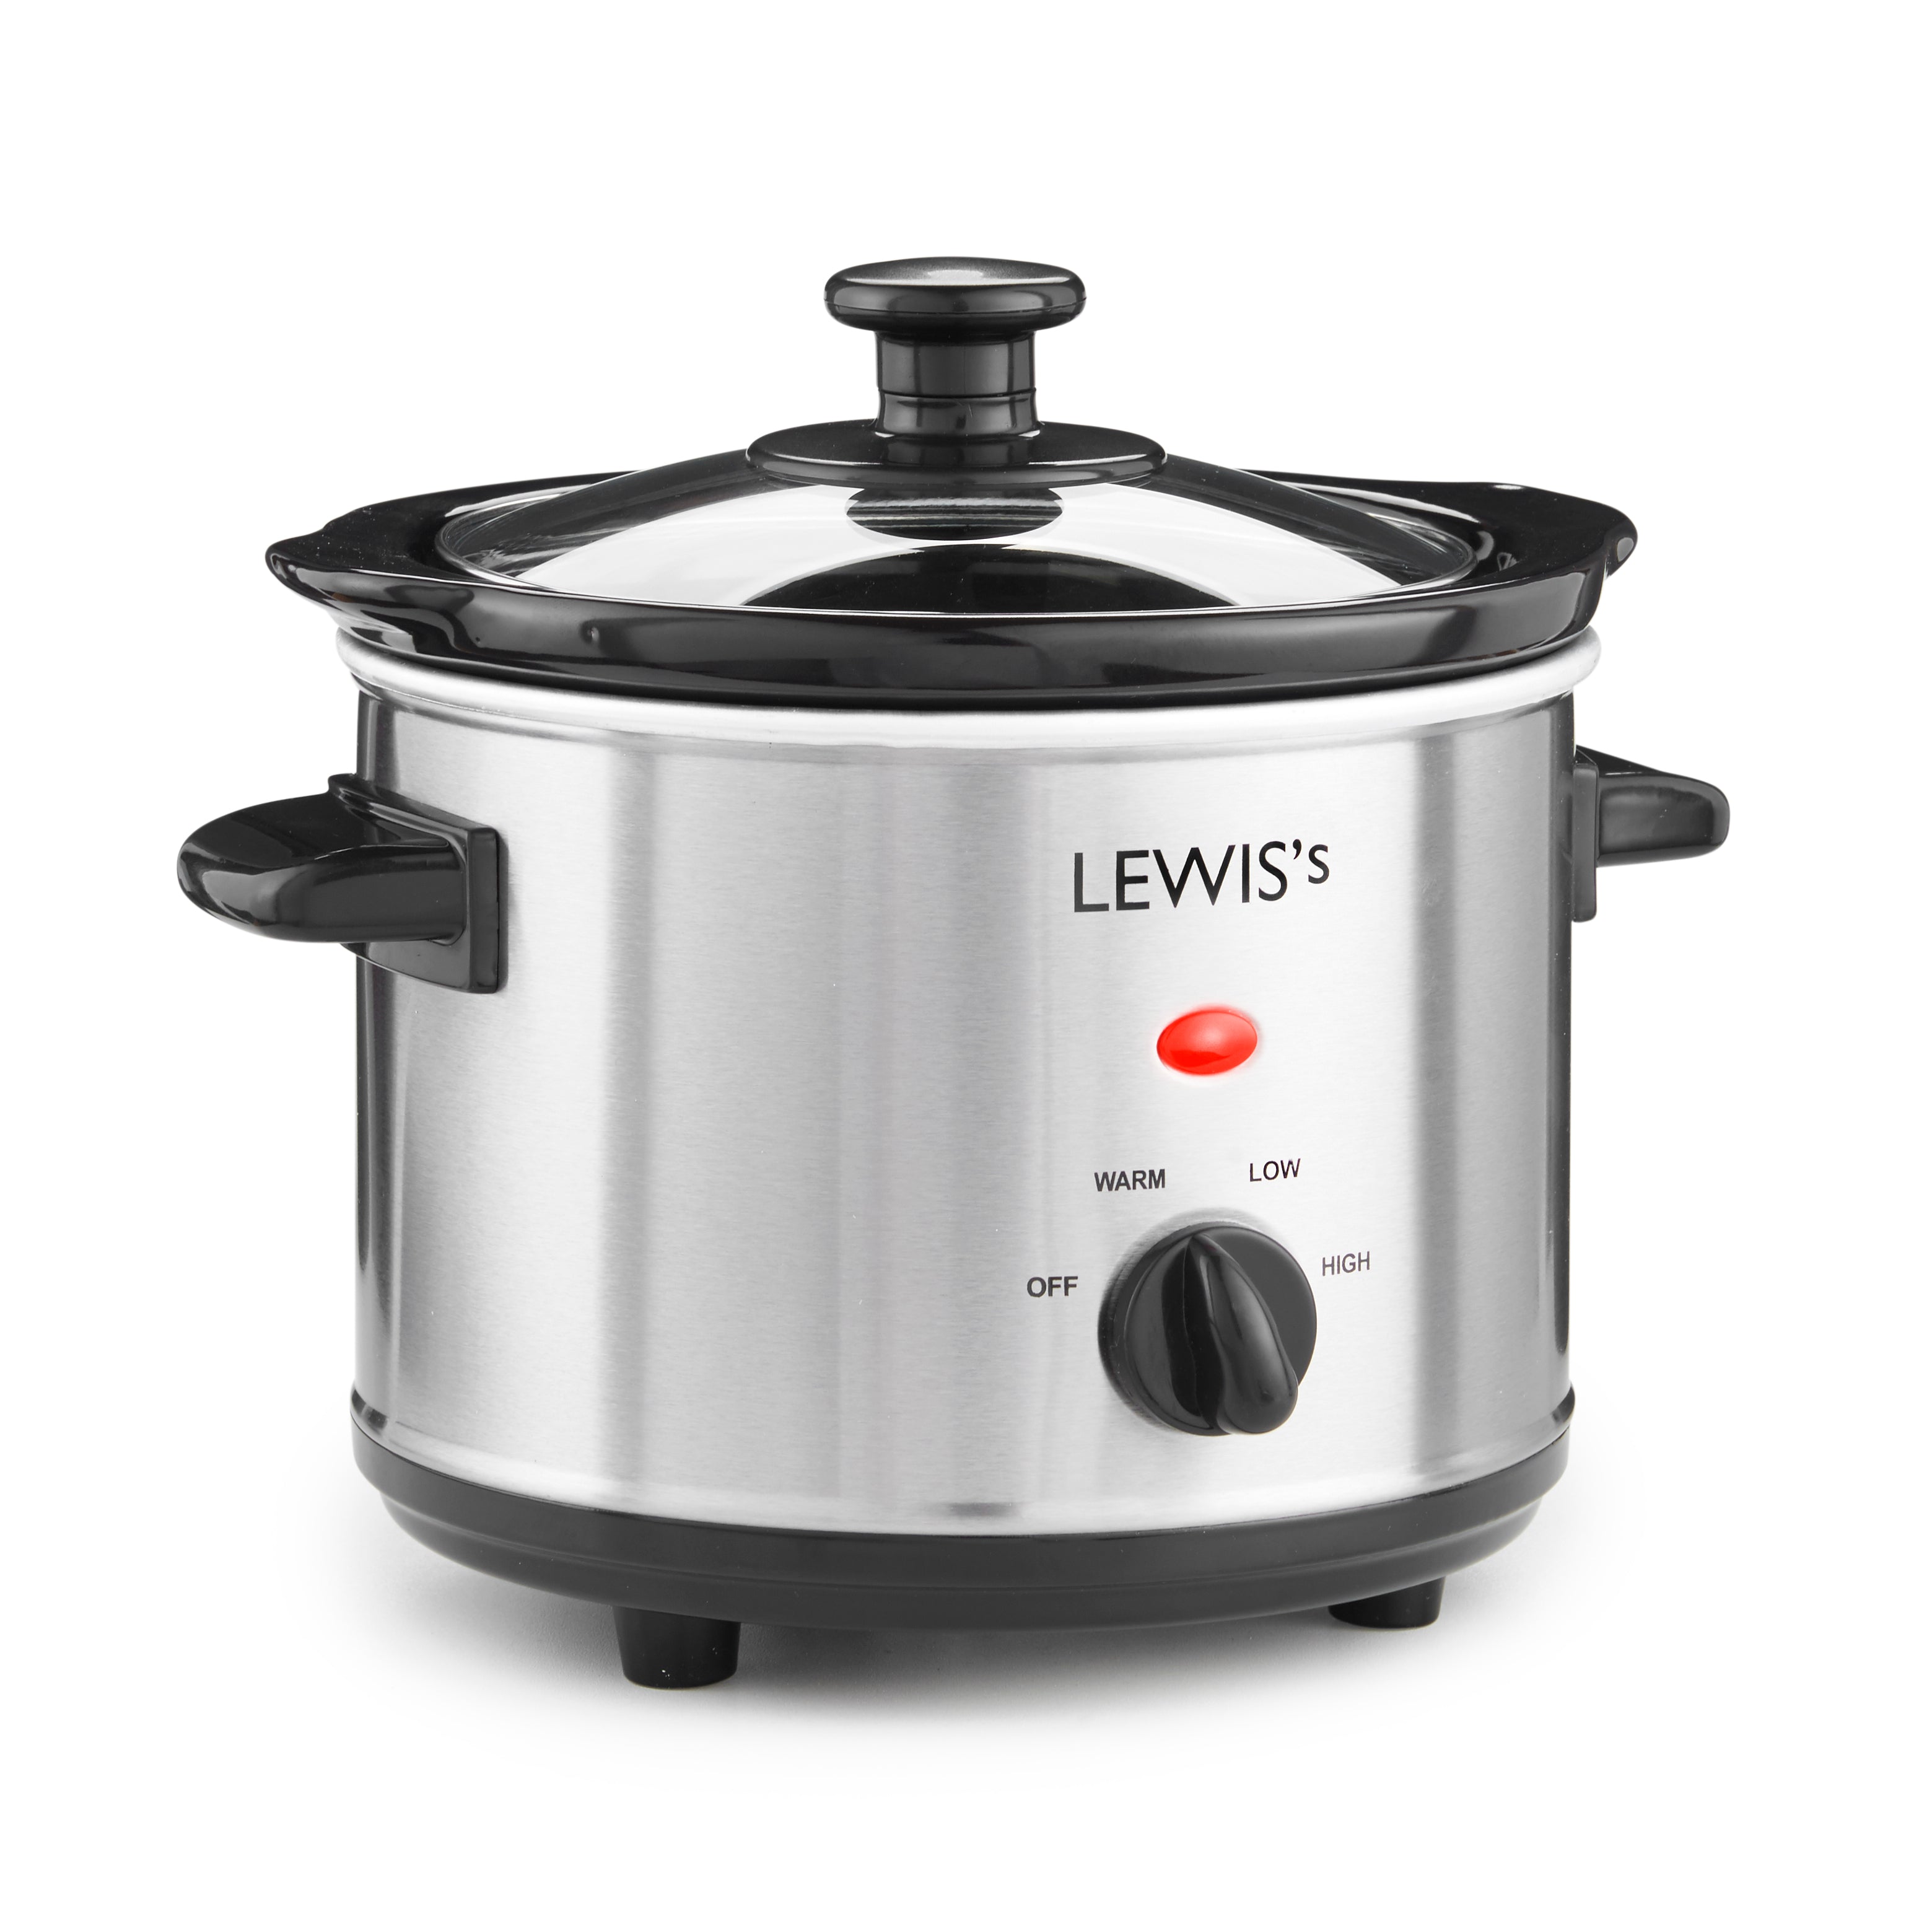 Lewis’s Slow Cooker 1.5L Stainless Steel  | TJ Hughes Silver